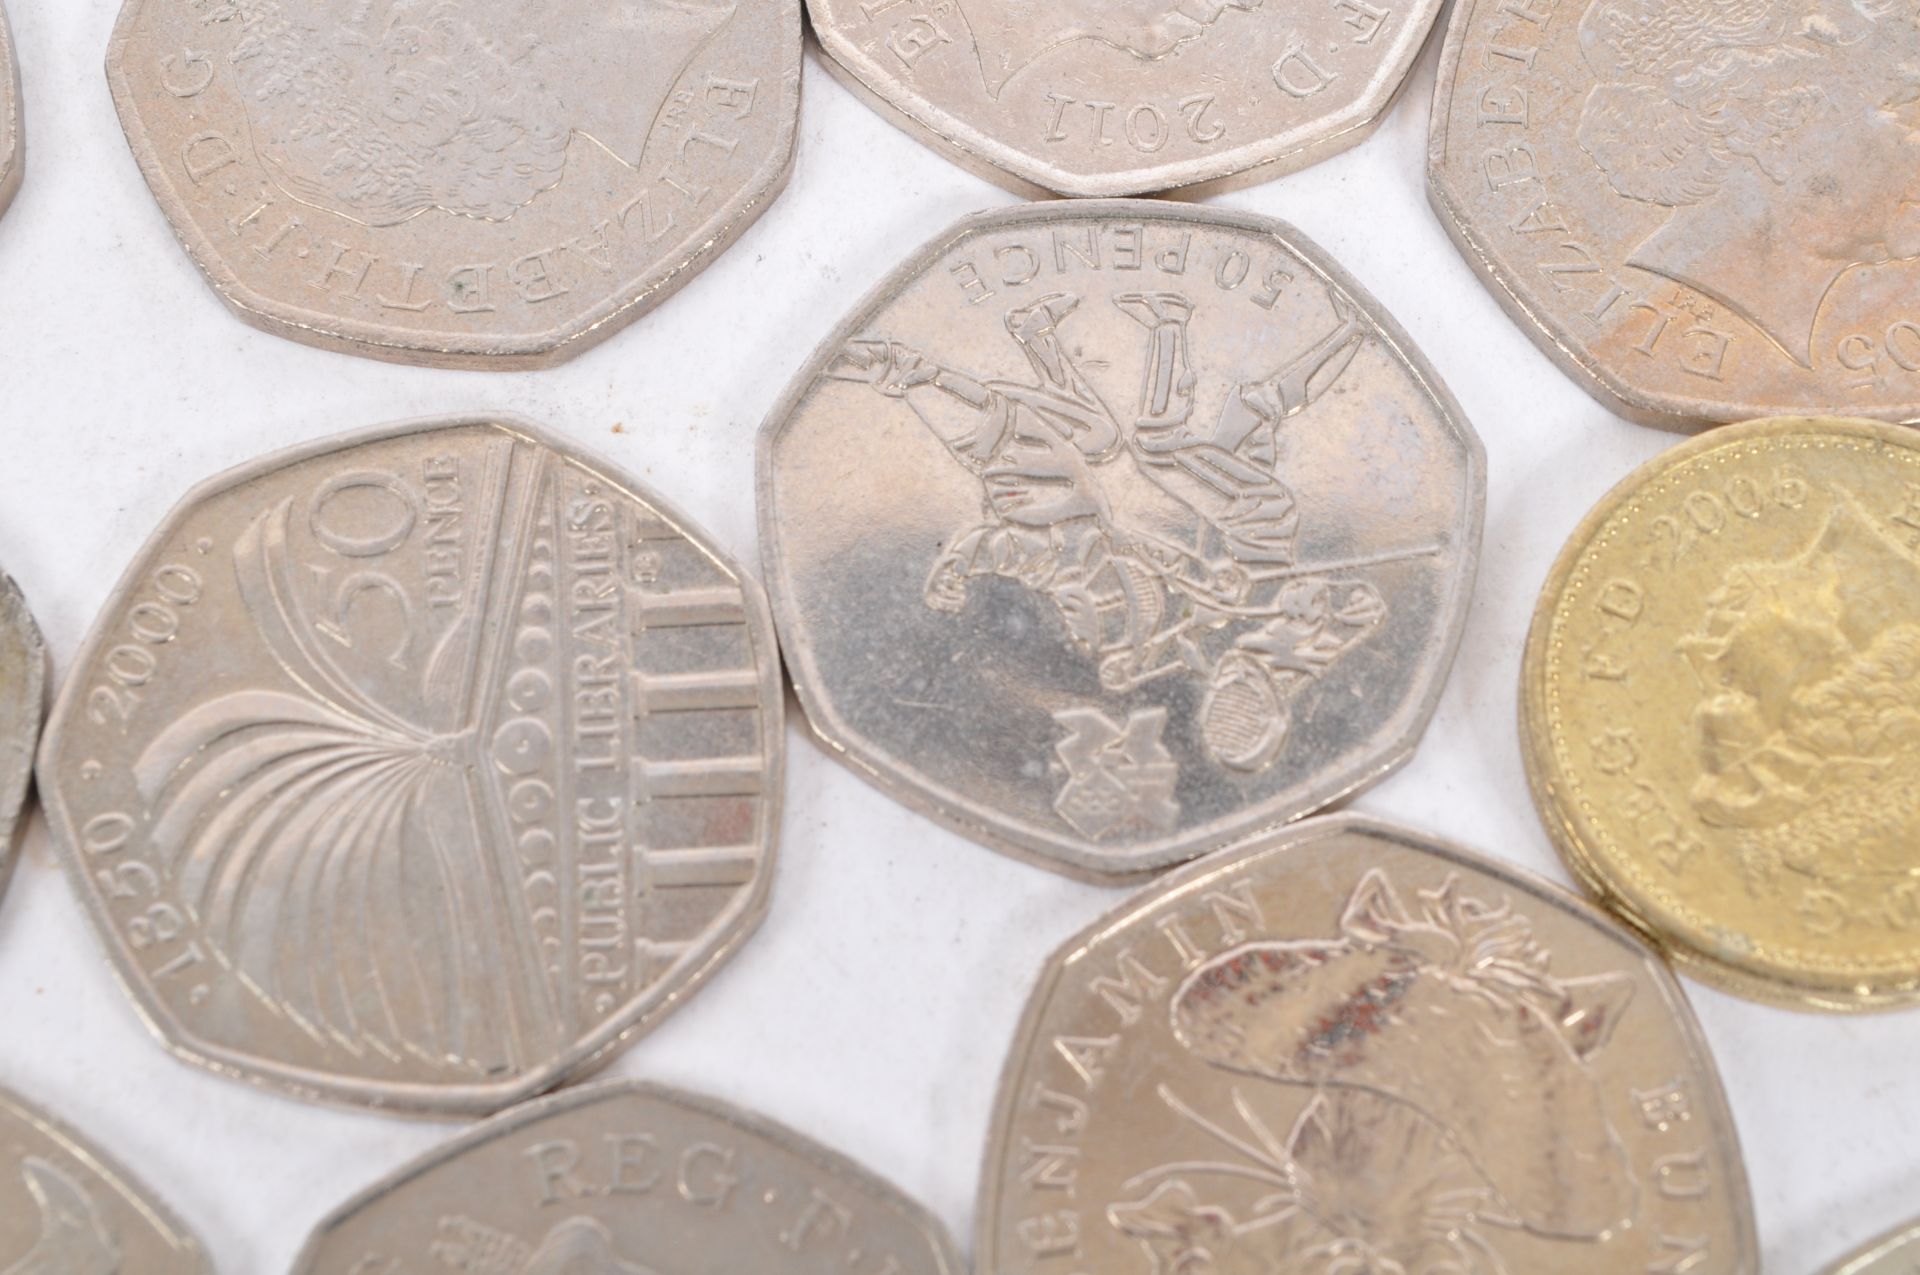 COLLETION OF UNITED KINGDOM CIRCULATED CURRENCY COINAGE - Image 9 of 9